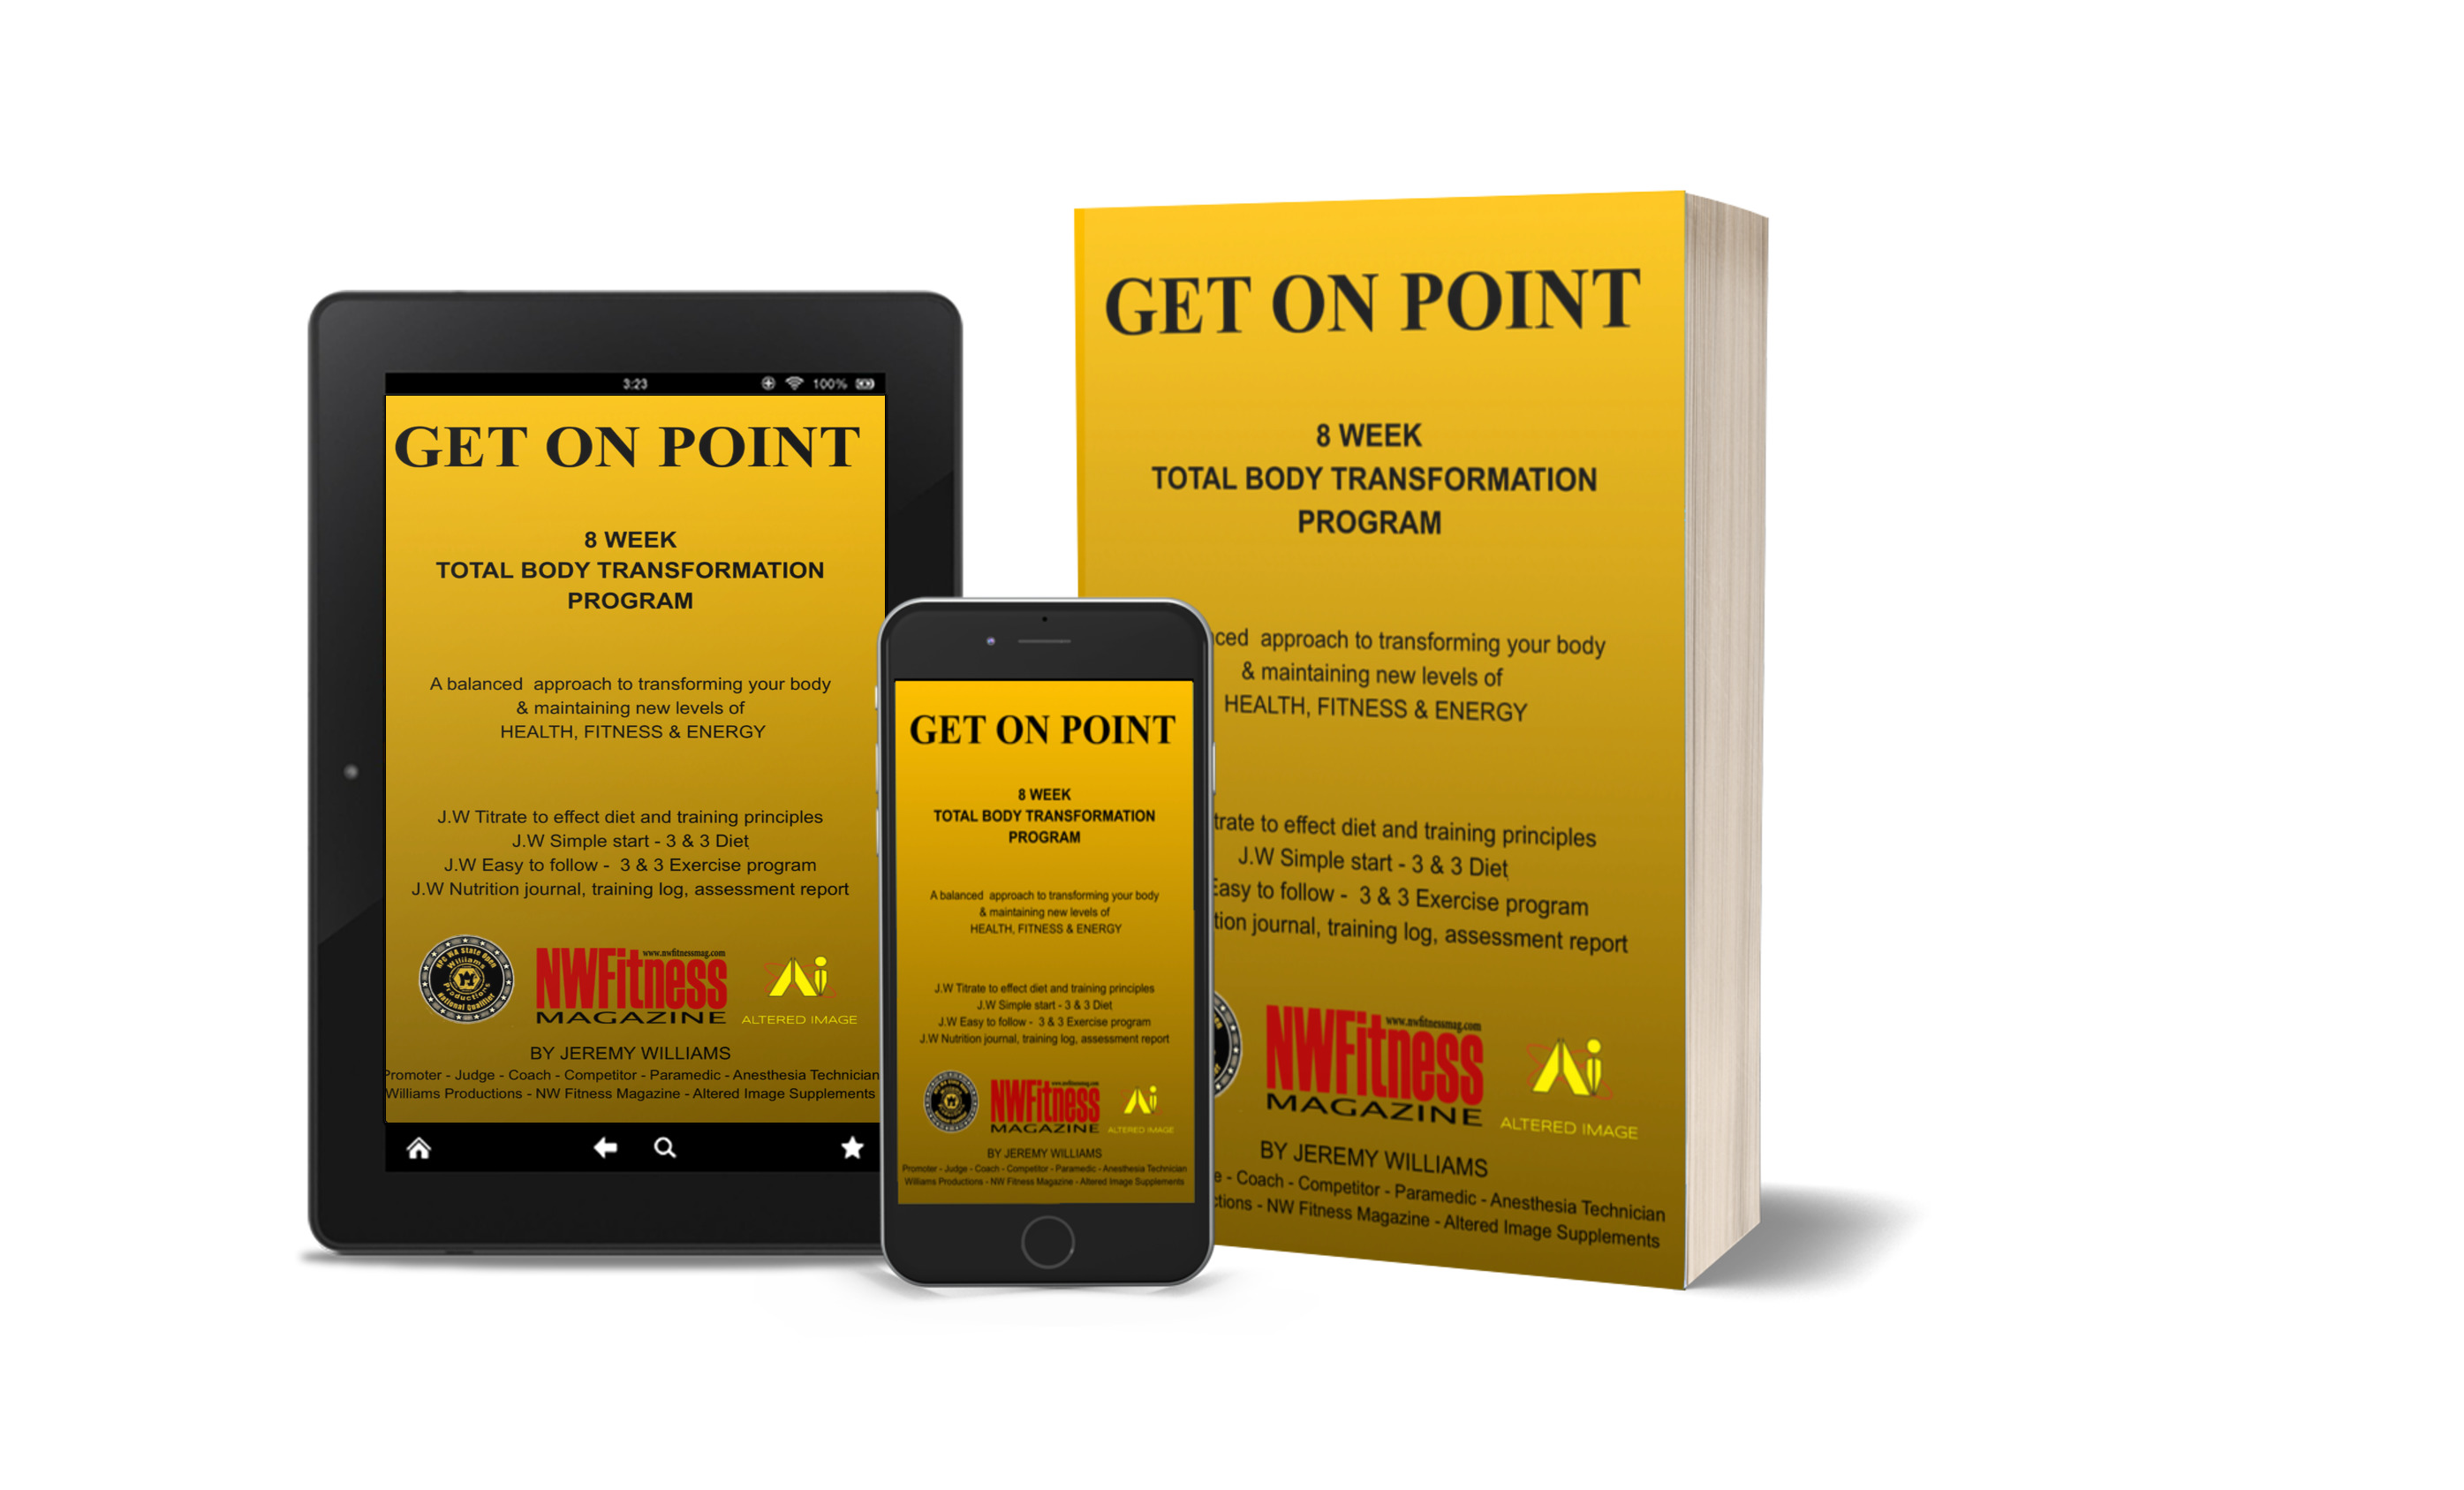 GET ON POINT 8 WEEK TOTAL BODY TRANSFORMATION PROGRAM A balanced  approach to transforming your body & maintaining new levels of HEALTH, FITNESS & ENERGY